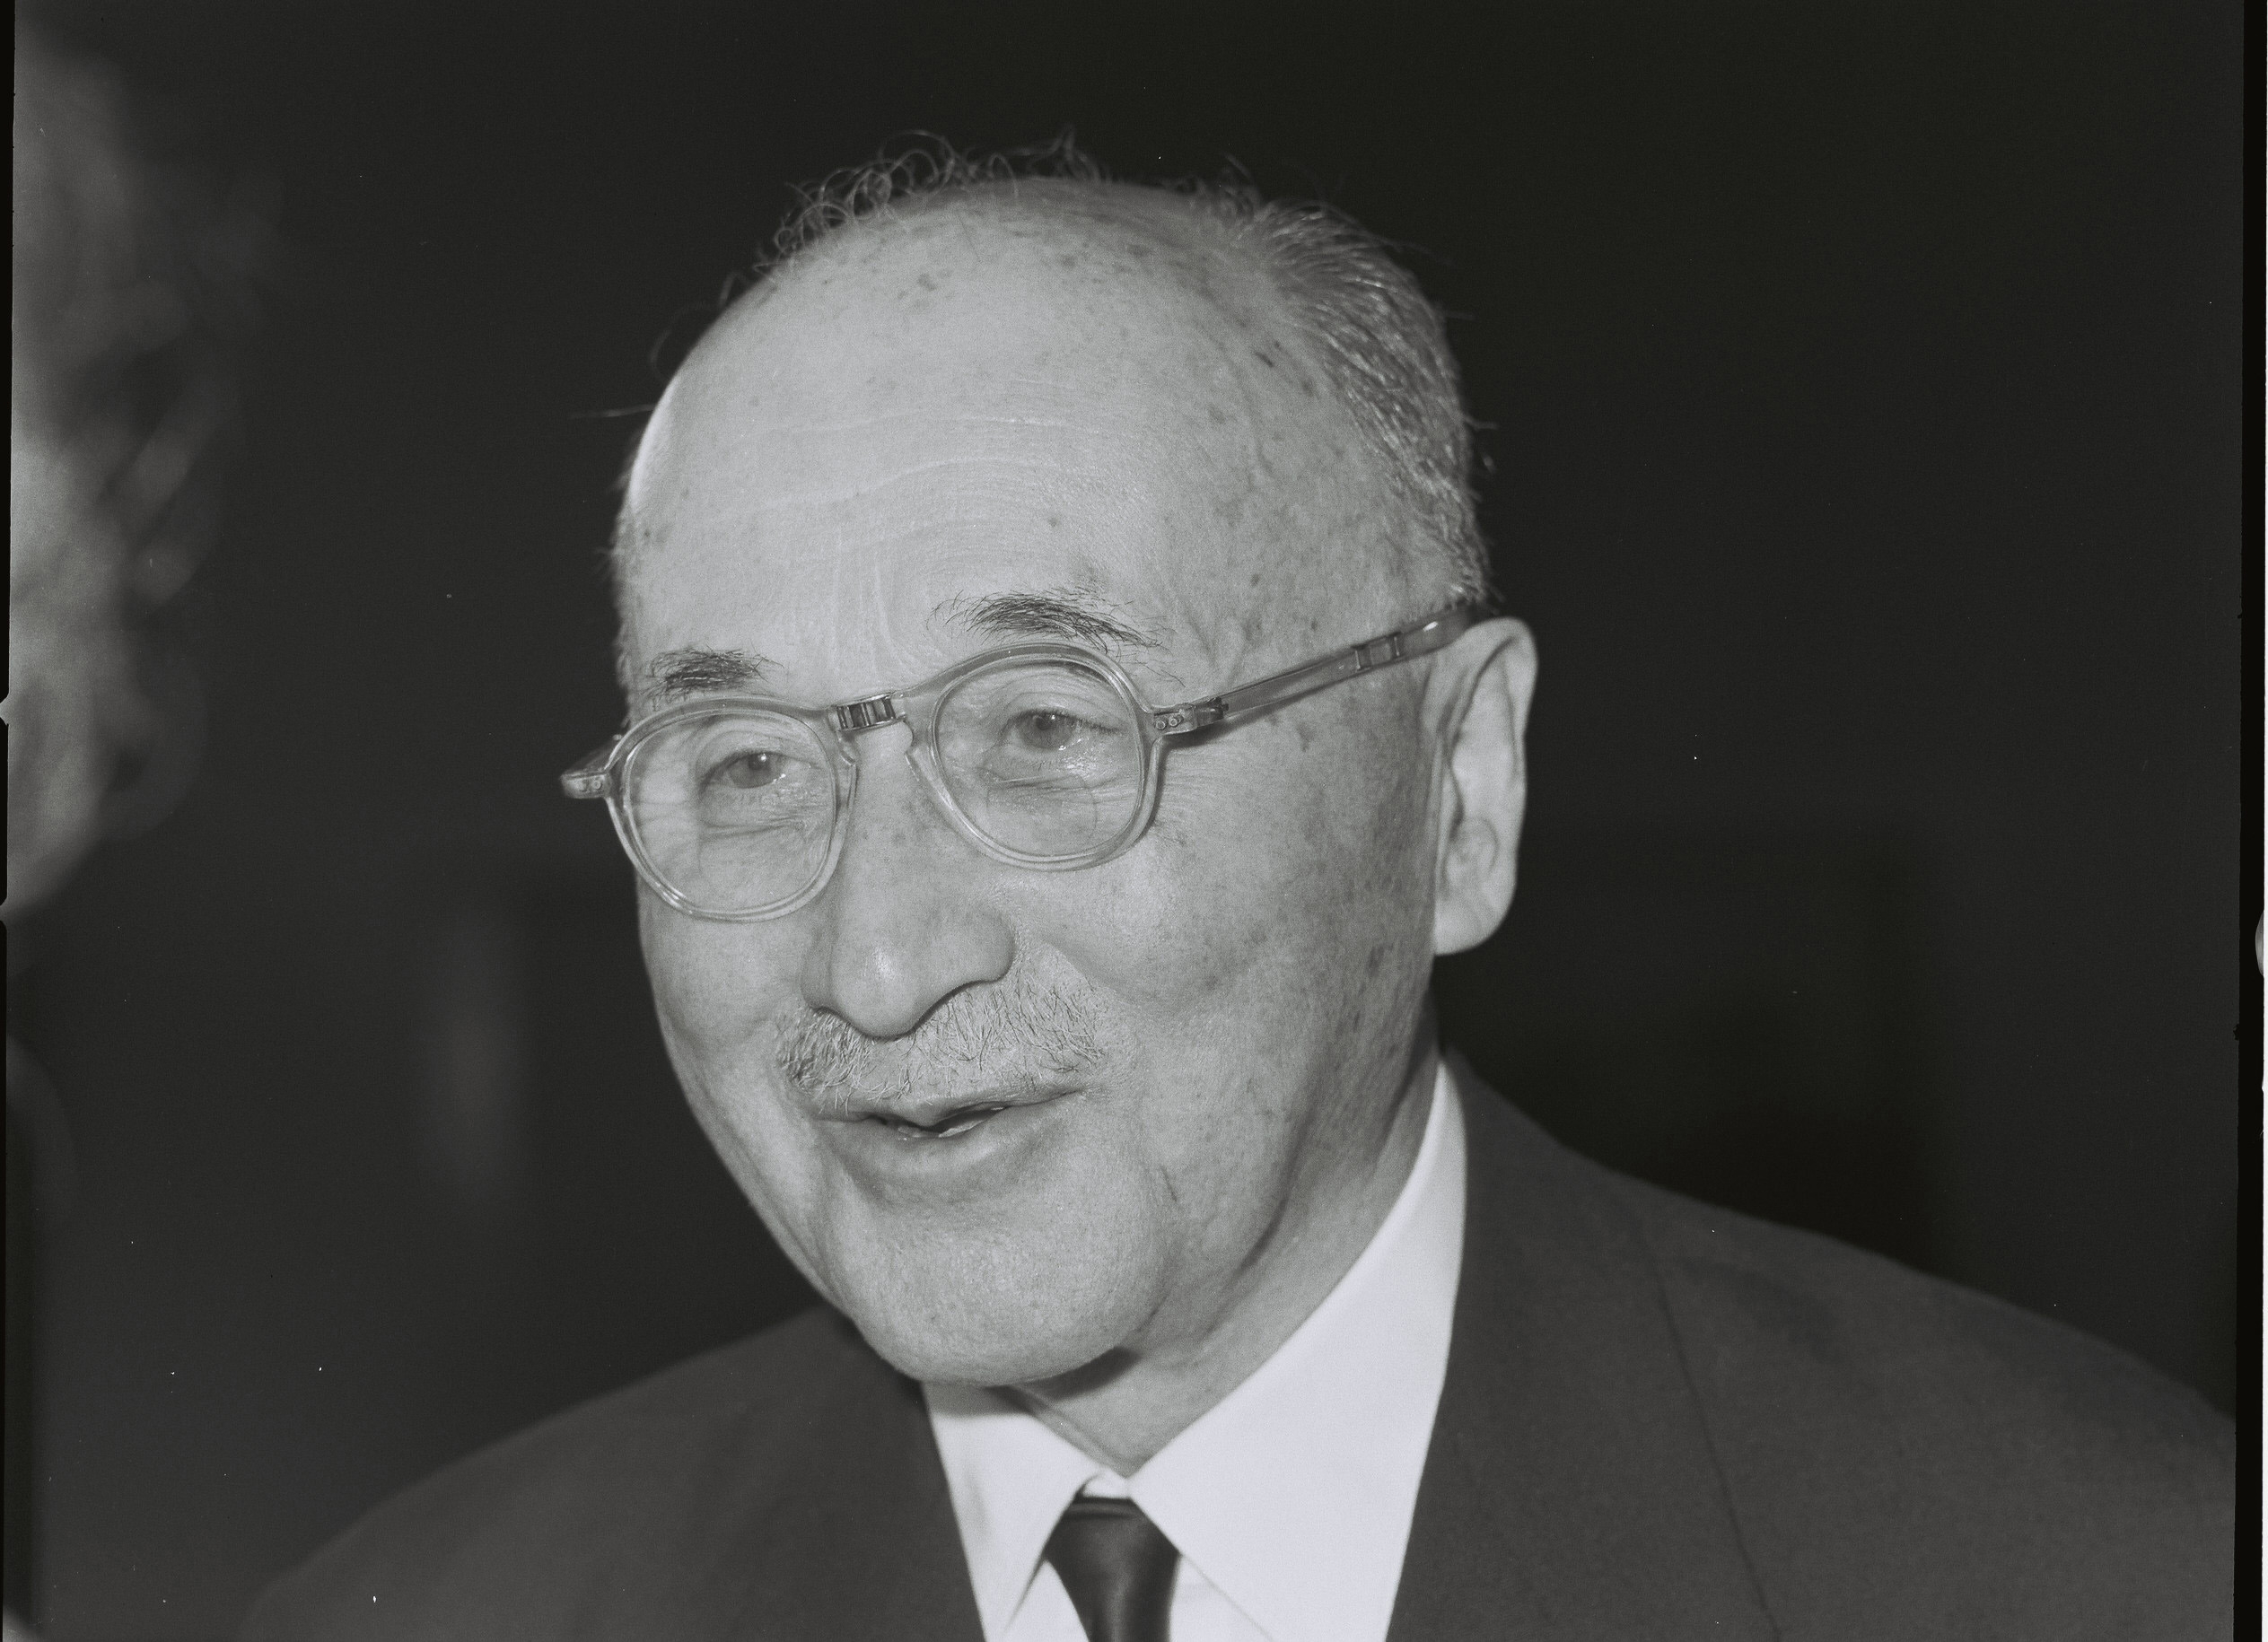 Black and white photo of Jean Monnet wearing a suit, smiling and wearing glasses